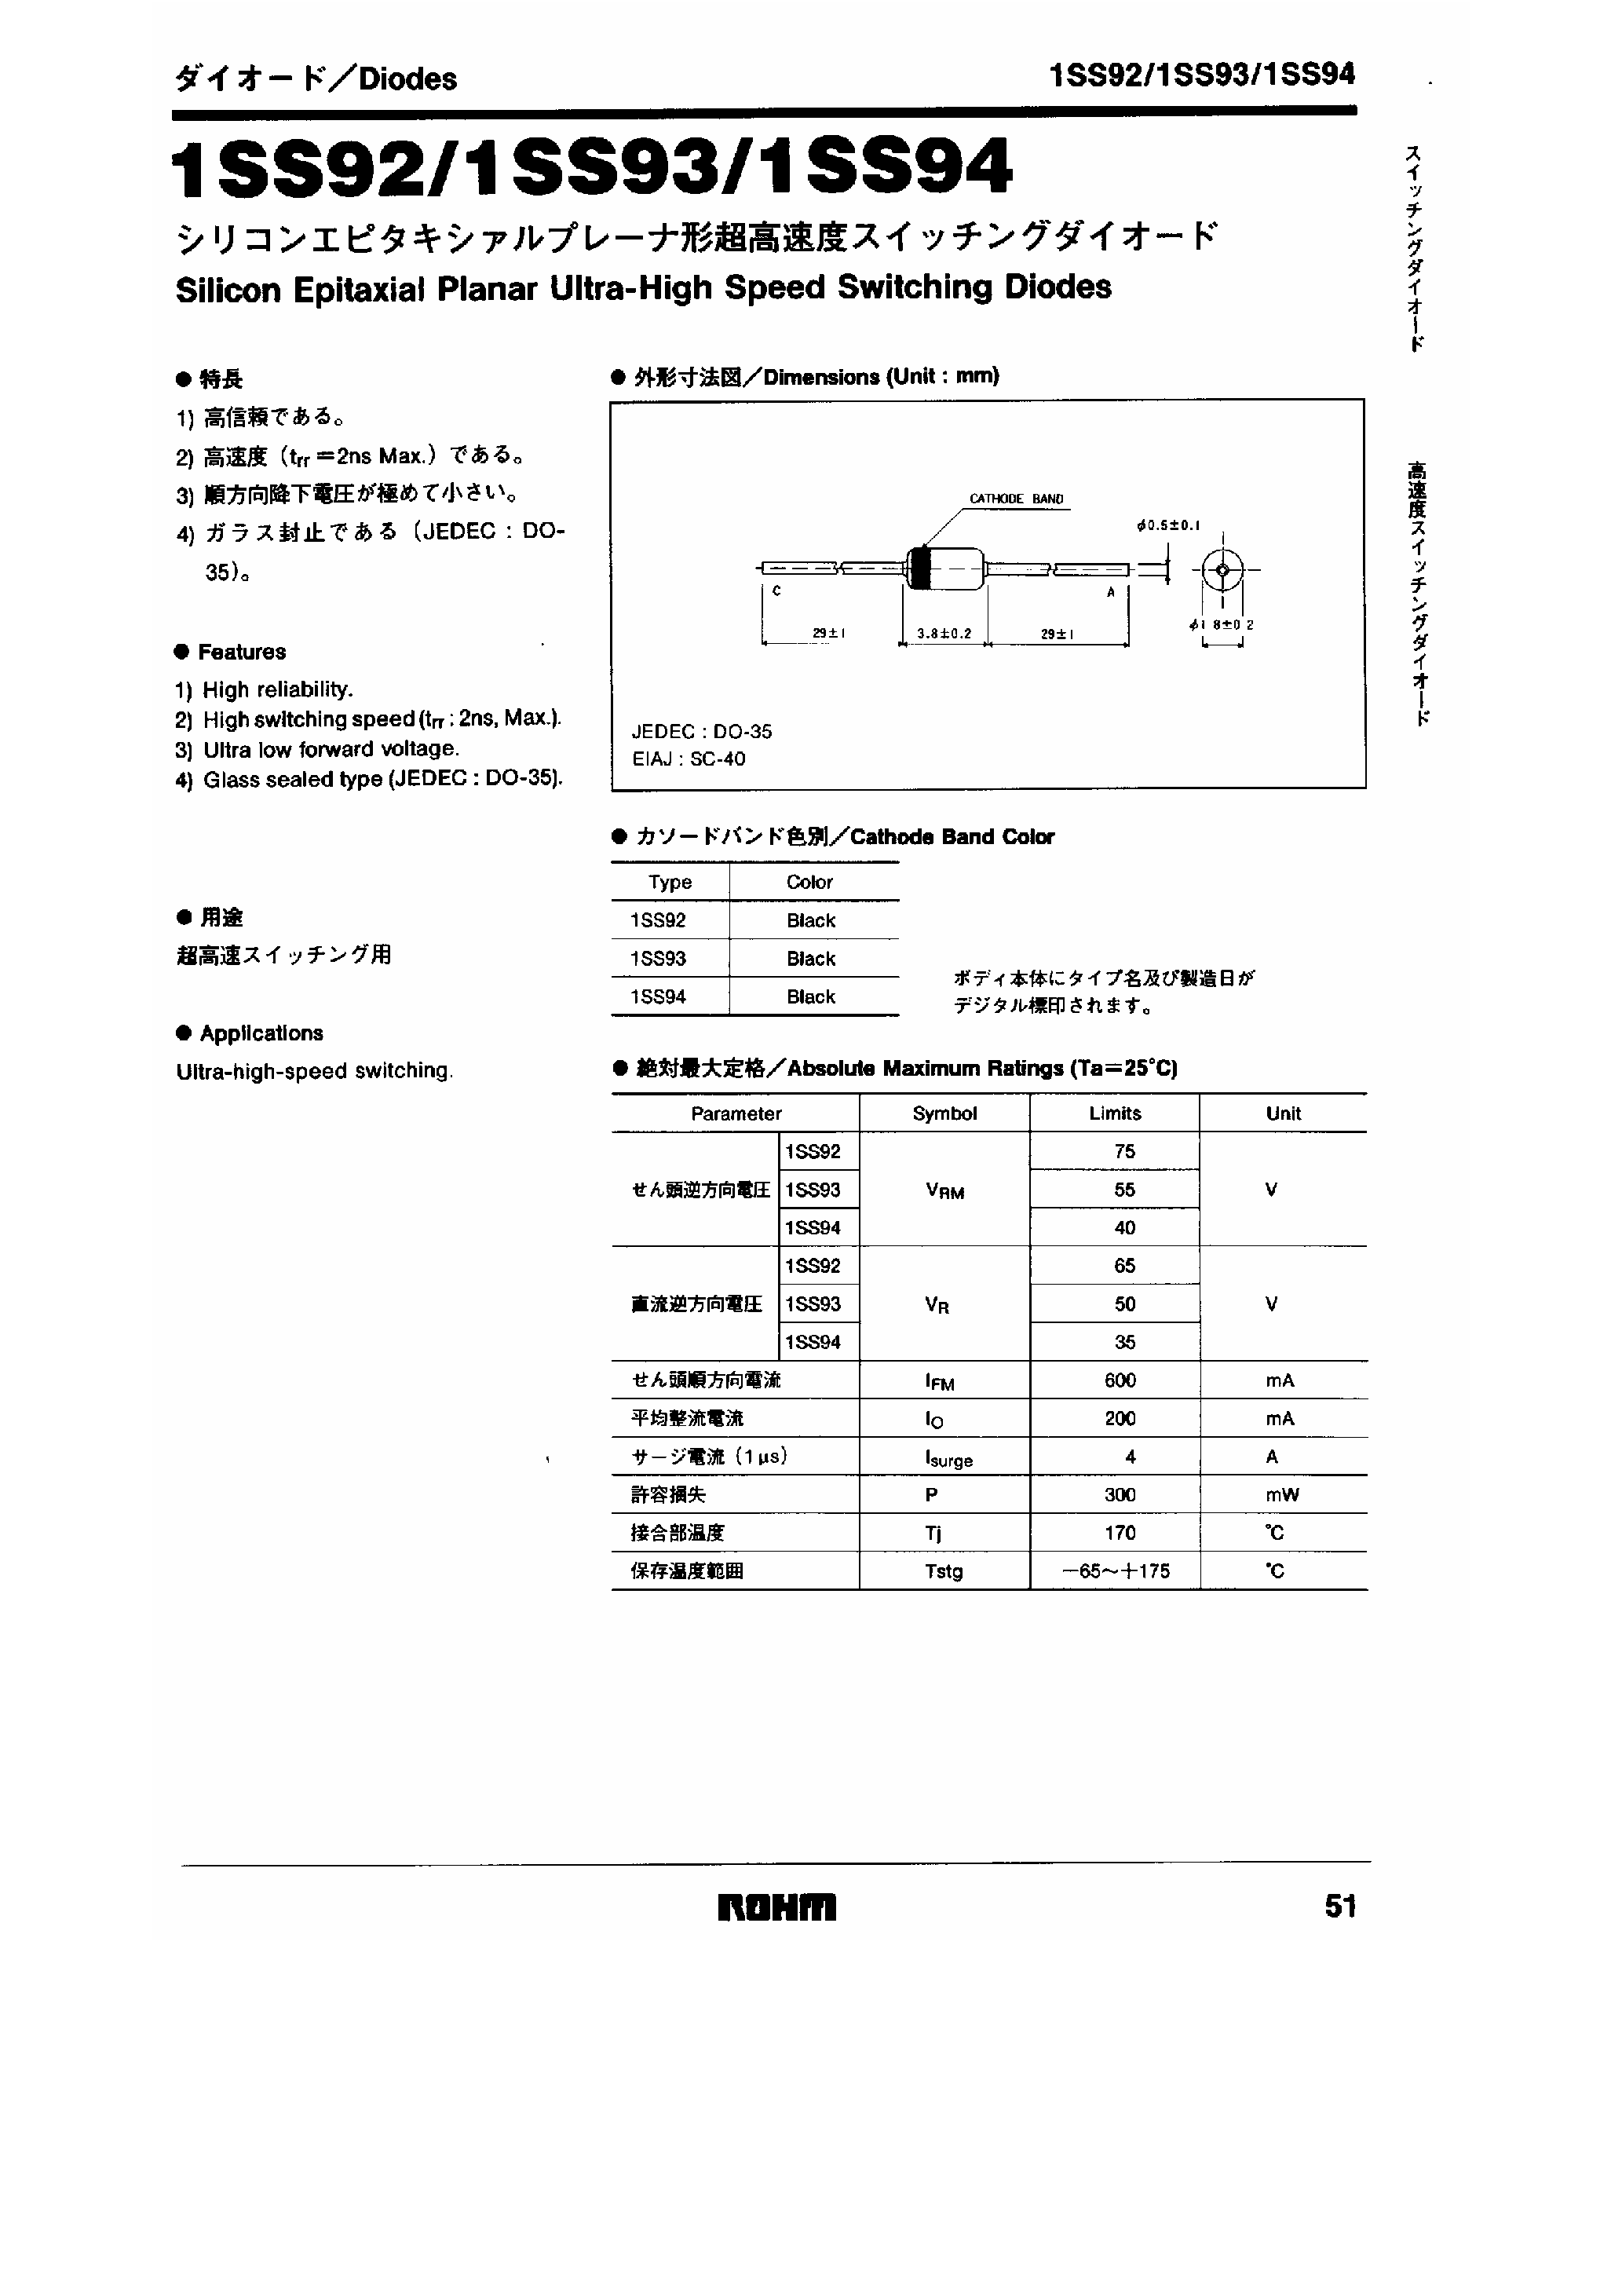 Datasheet 1SS92 - (1SS93/1SS94) Silicon Epitaxial Planar Ultra-High Speed Switching Diodes page 1